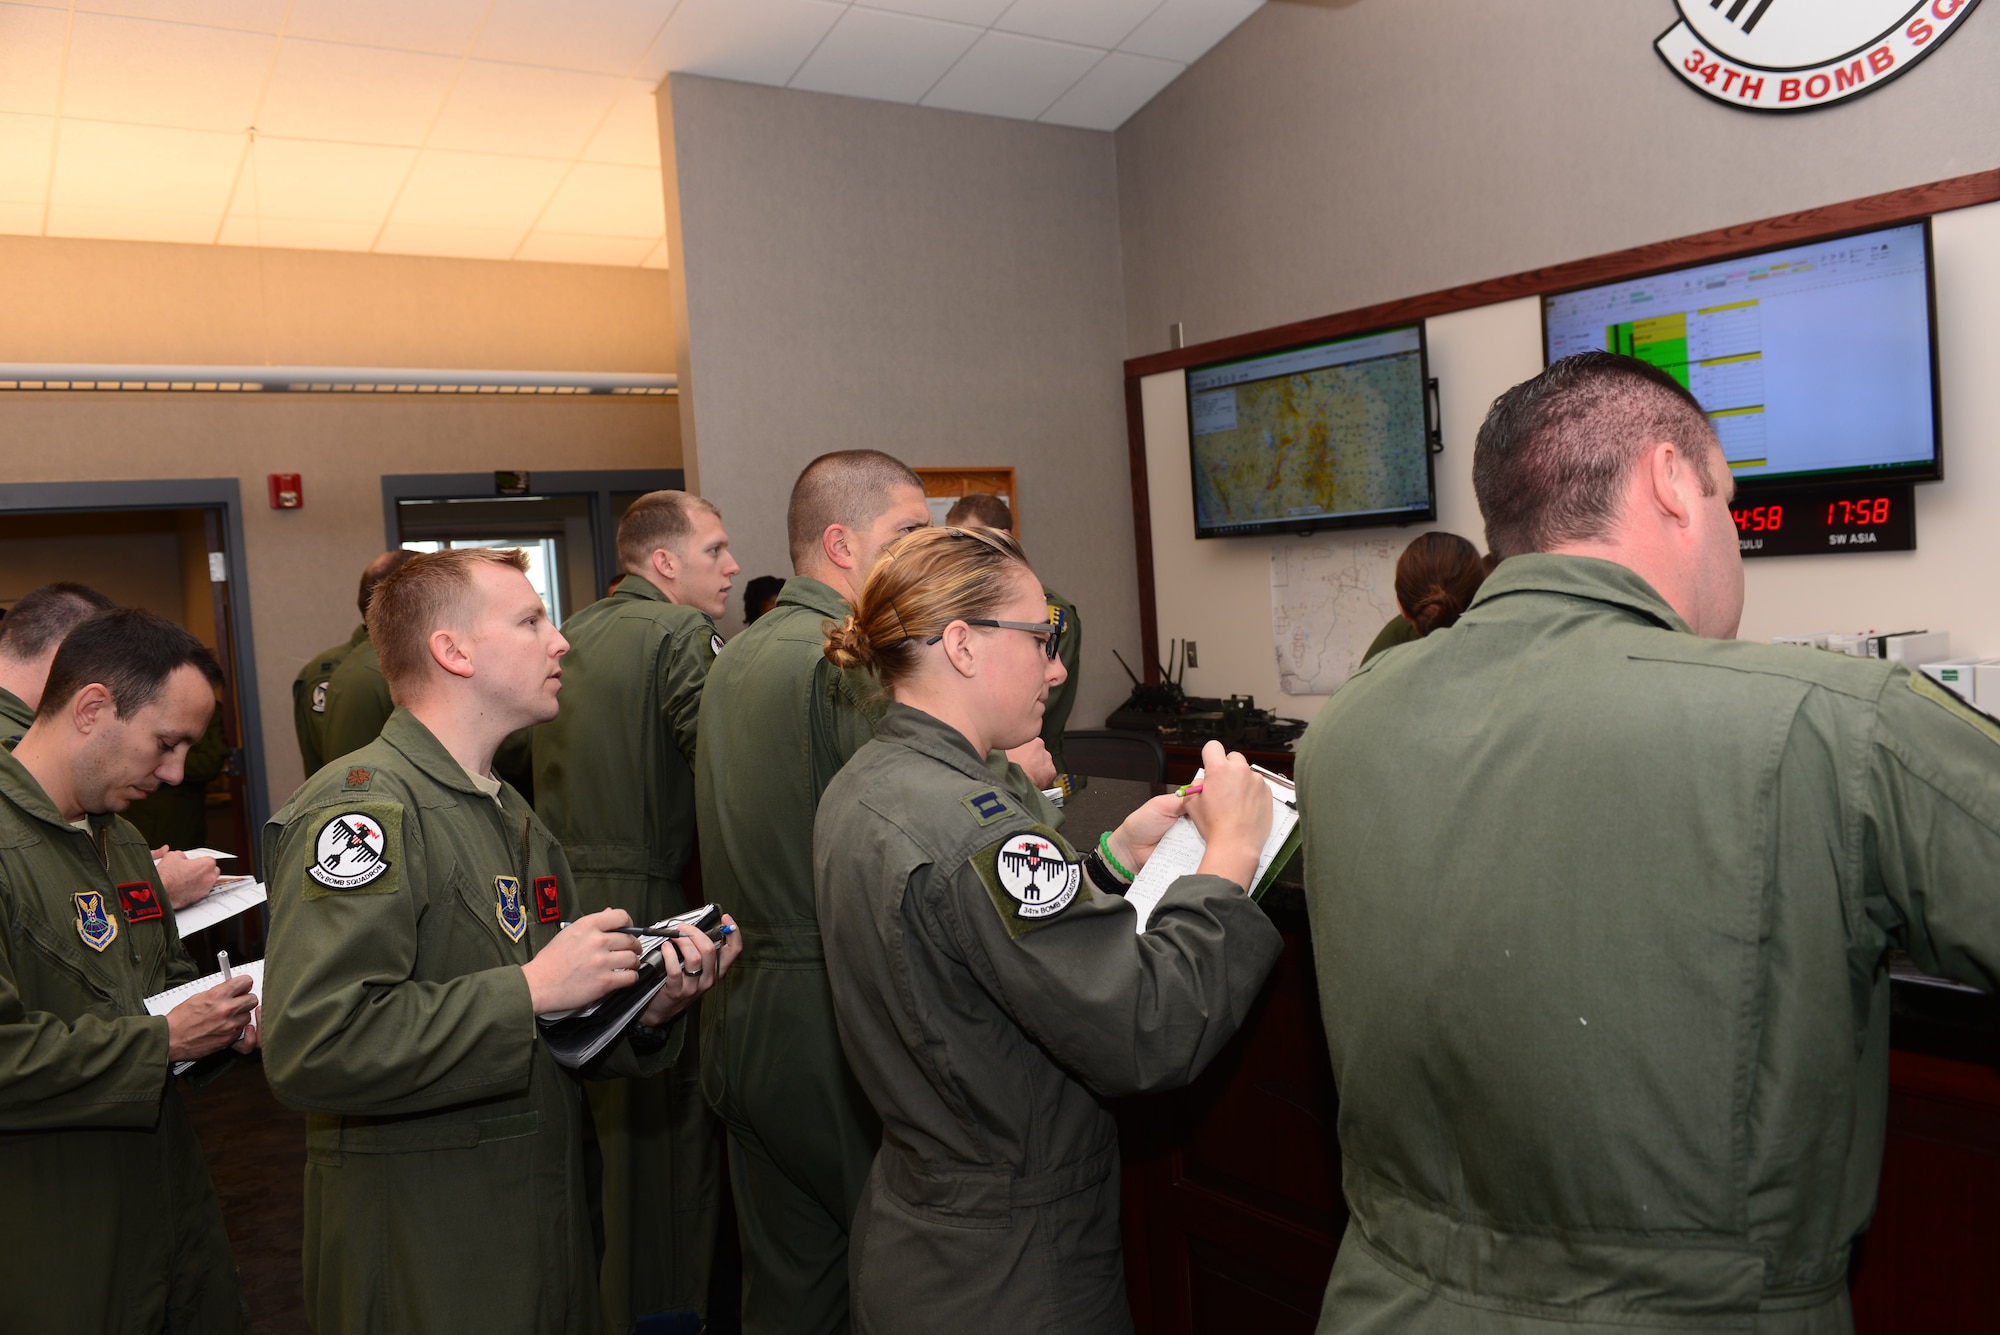 Pilots and weapon systems officers attend a step brief in preparation for Red Flag at Ellsworth Air Force Base, S.D., July 6, 2017. The exercise will take place from July 10 to 28 and will provide participants with realistic training in a combined air, ground, space and electronic threat environment to maximize the combat readiness, capability and survivability of participating units. (U.S. Air Force photo by Airman 1st Class Donald C. Knechtel)